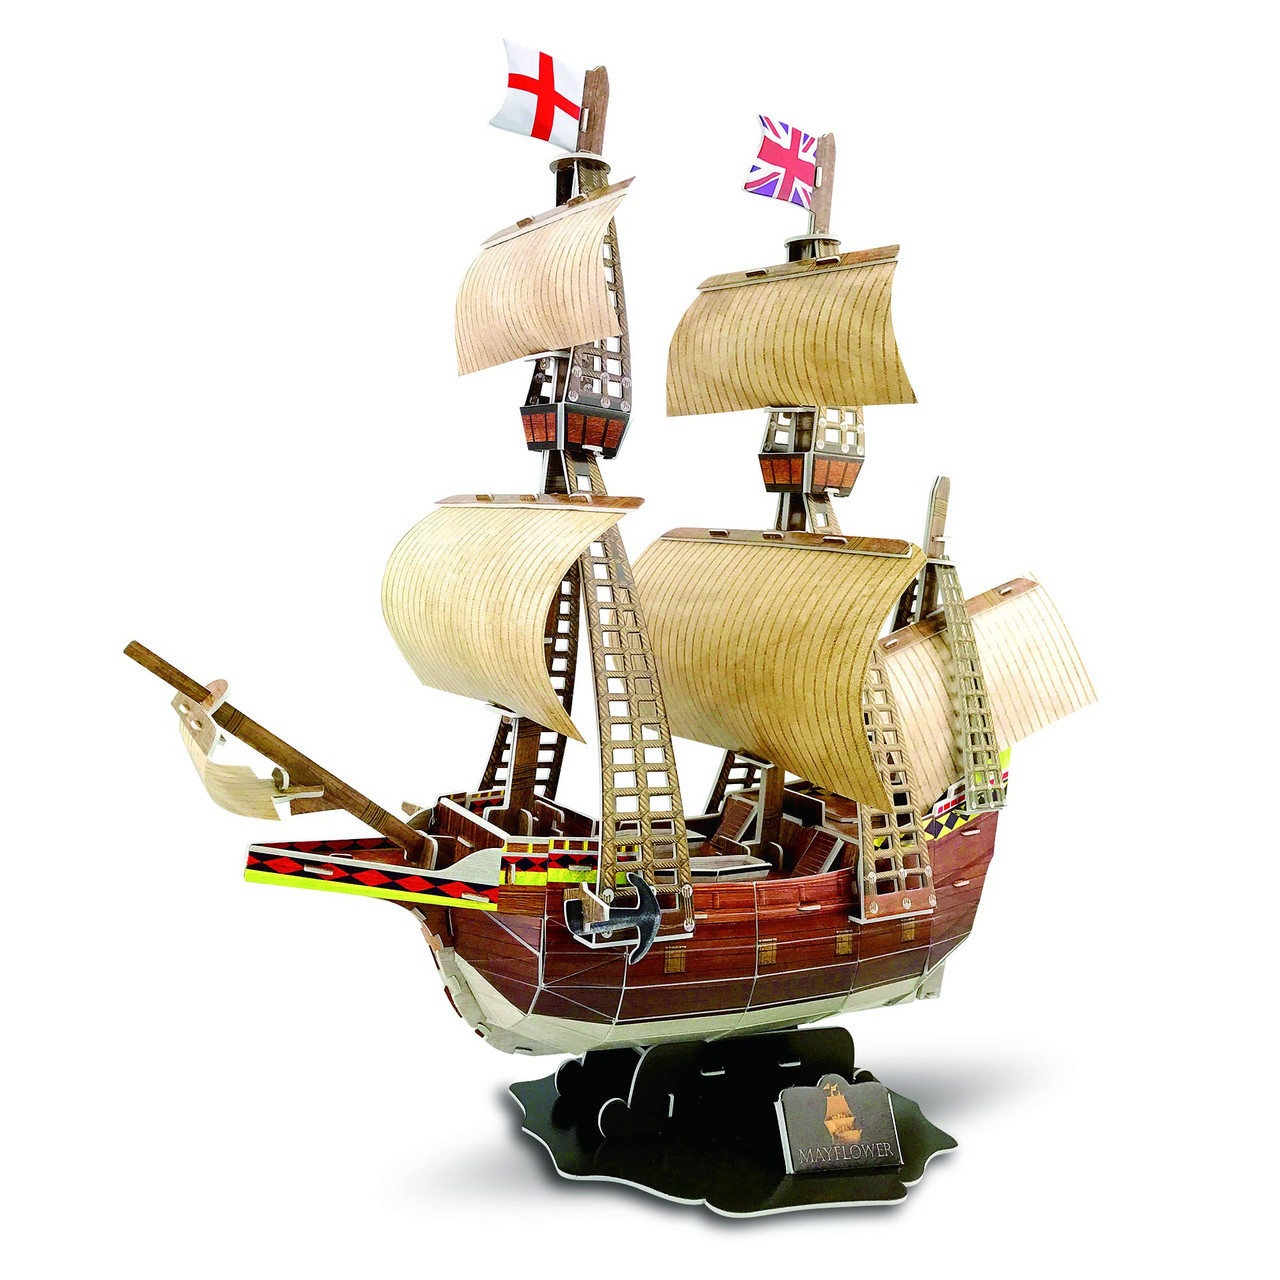 Puzelworx 3D Puzzles for Adult and Kids, Mayflower Model Kit